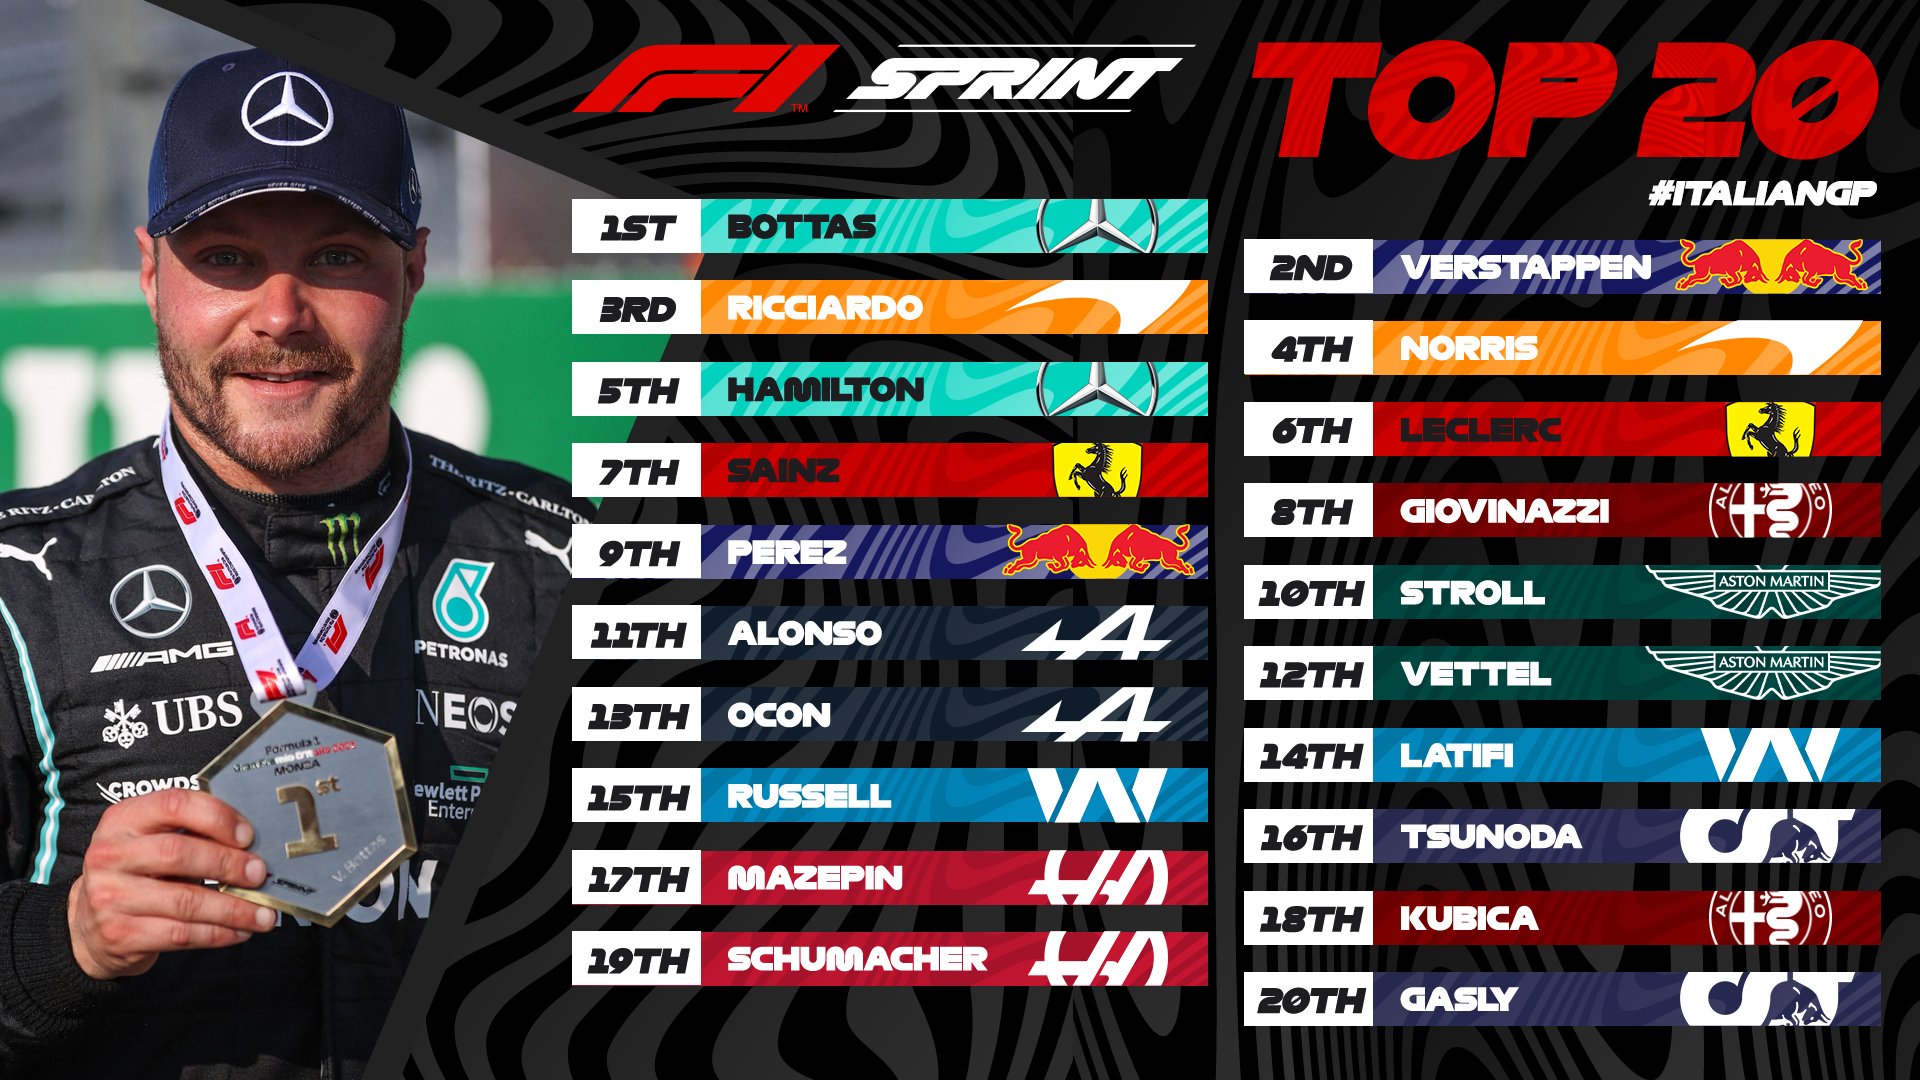 formula 1 results today